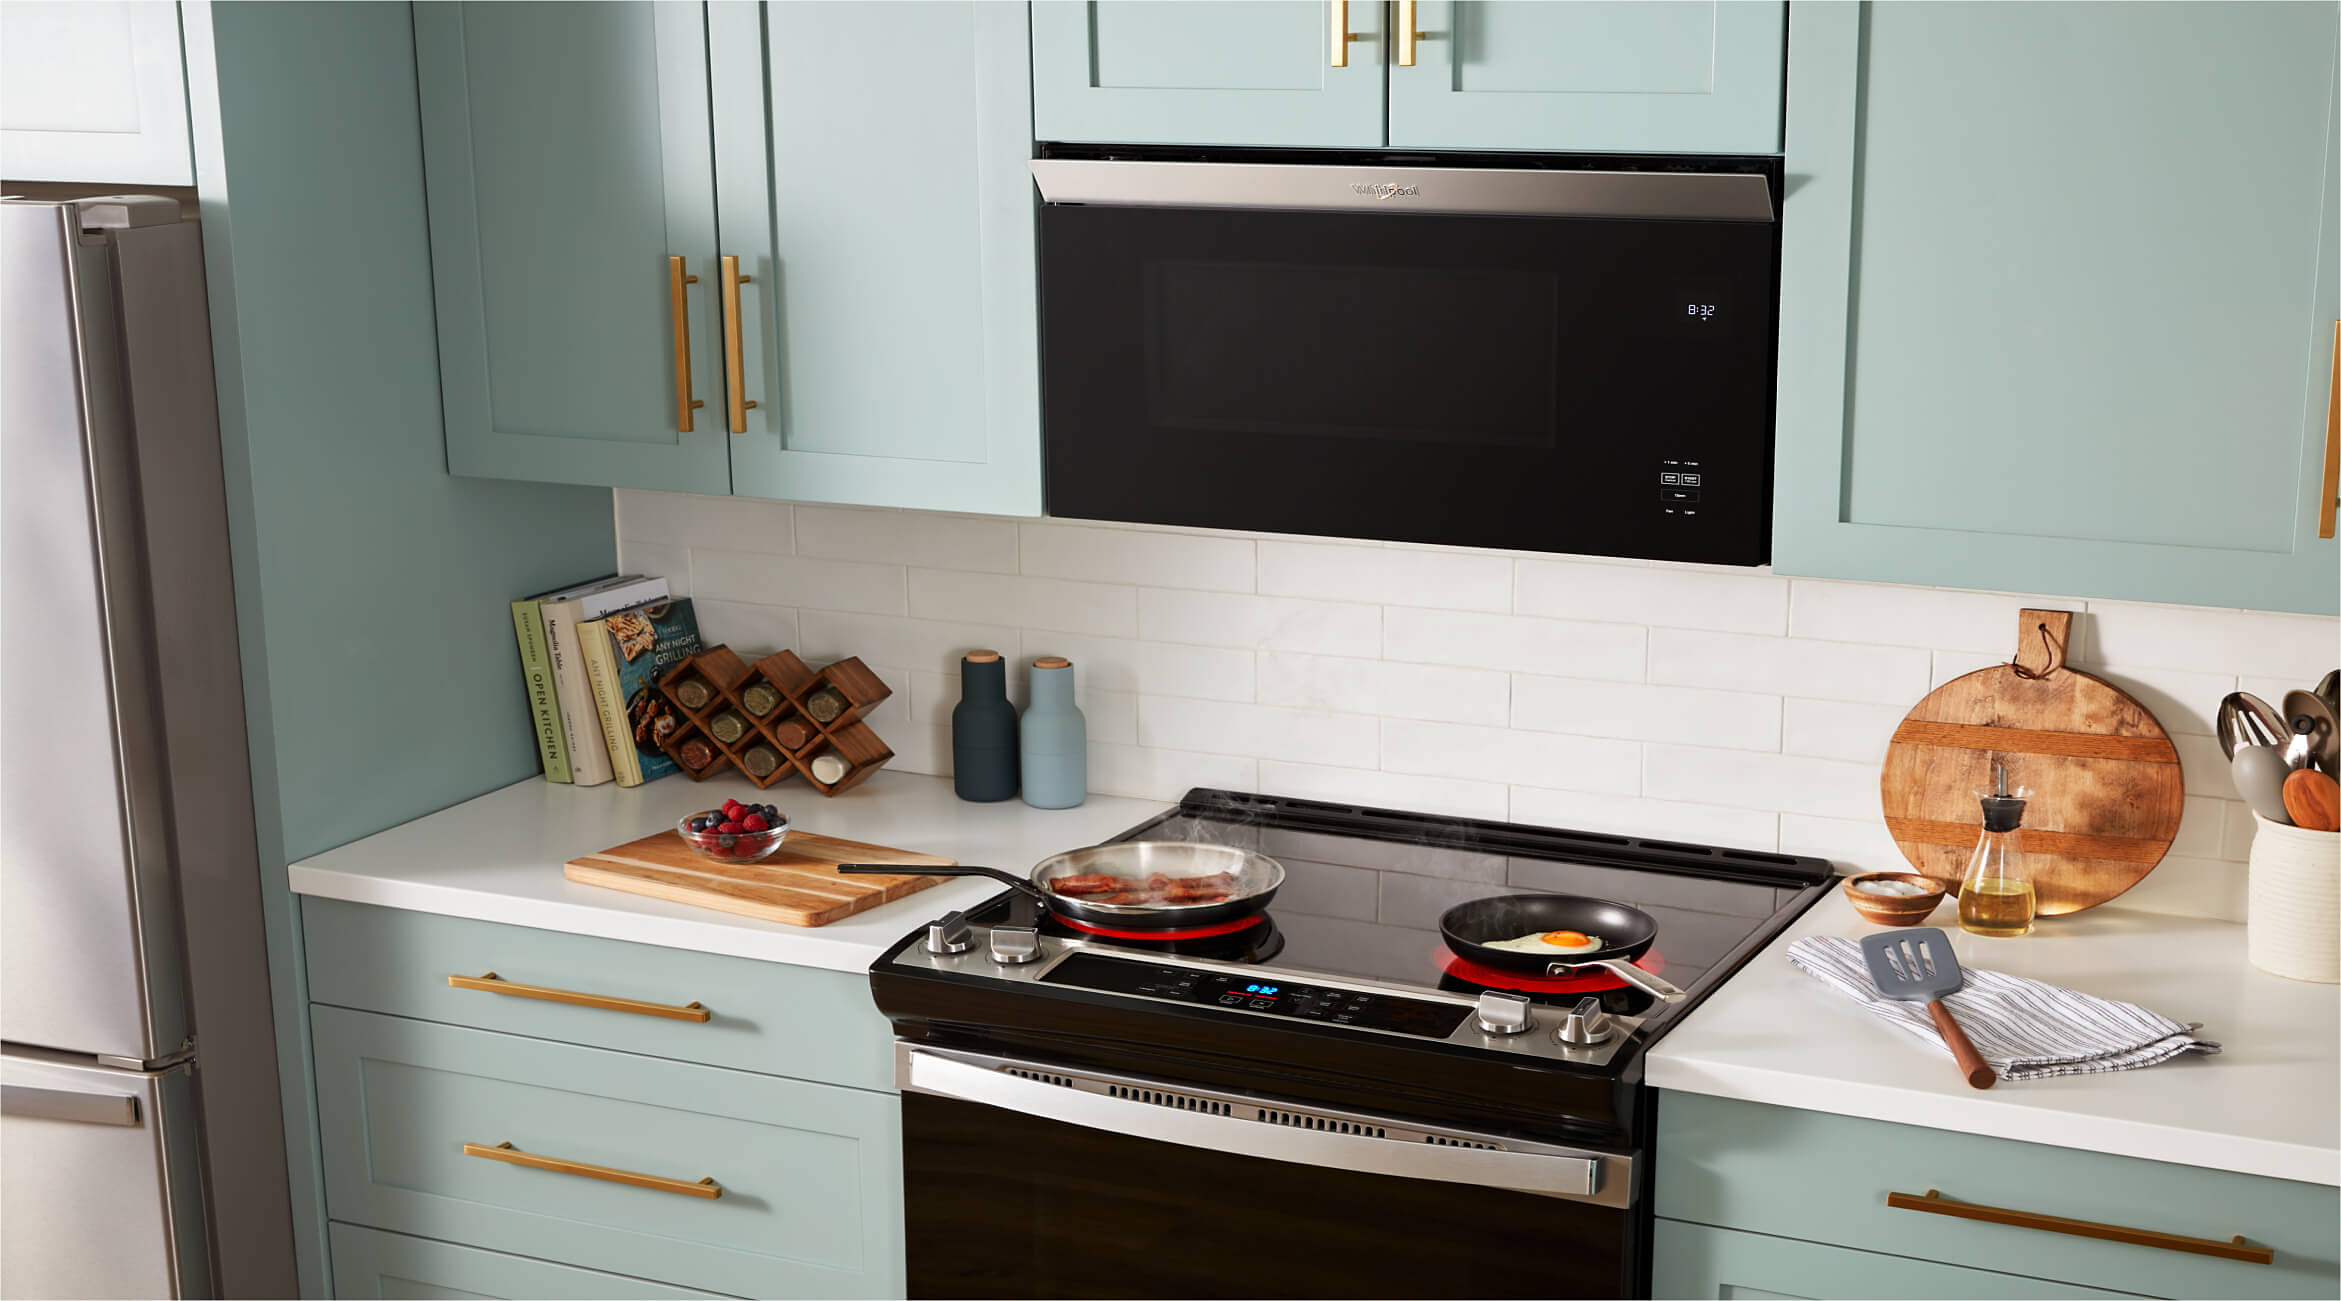 Whirlpool® Flush Built-In Over-the-Range Microwave and Slide-In Electric Range in a kitchen with light sage green cabinets.